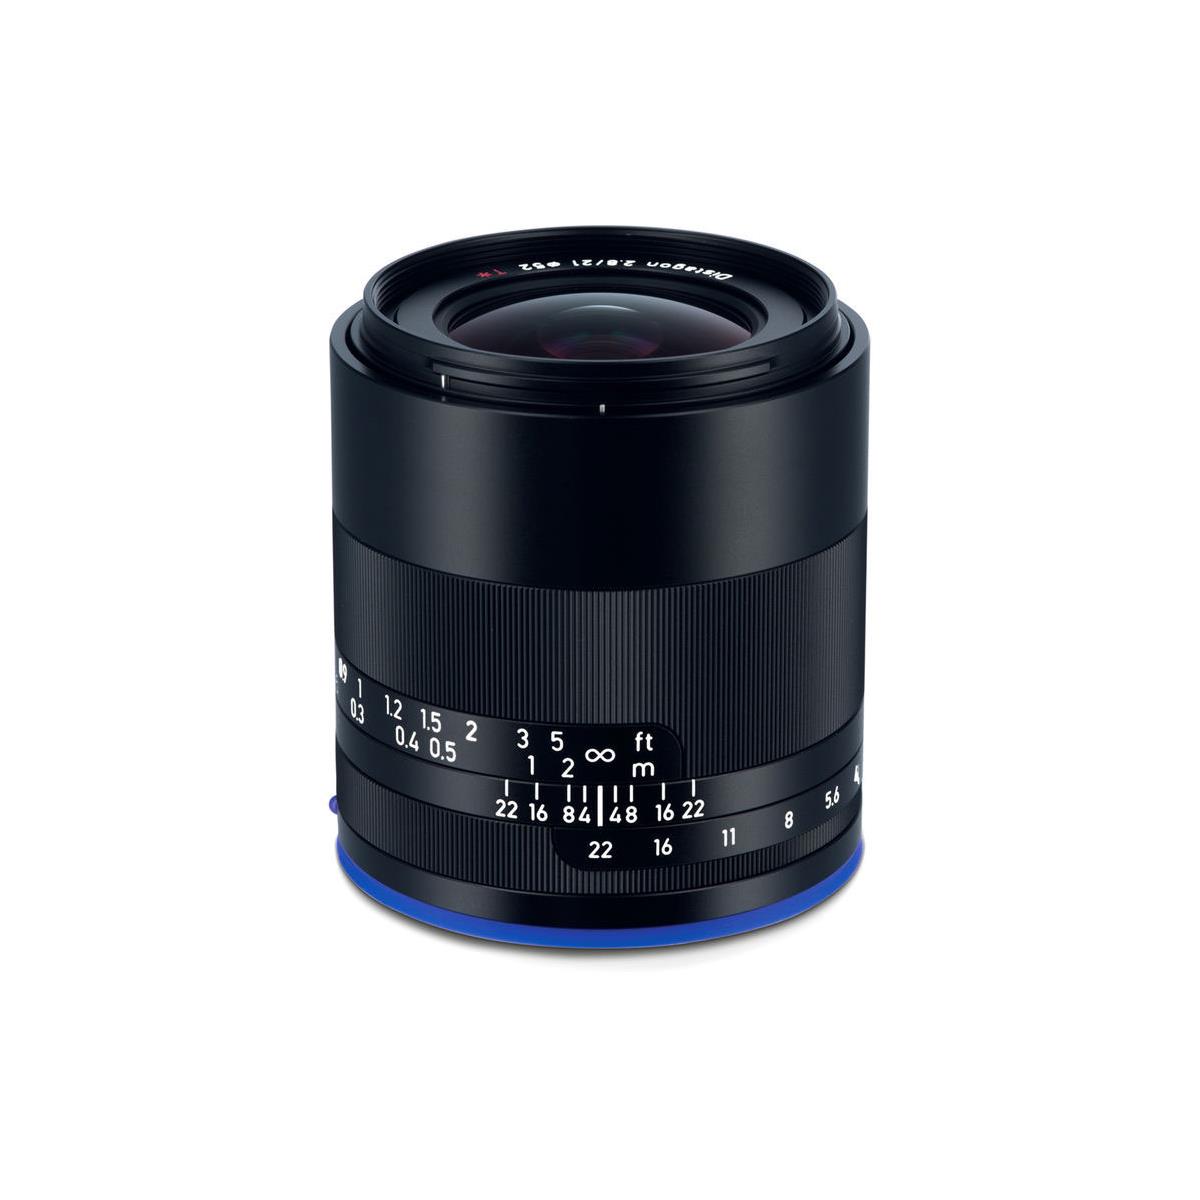 Zeiss 21mm f2.8 Loxia Lens for Sony E